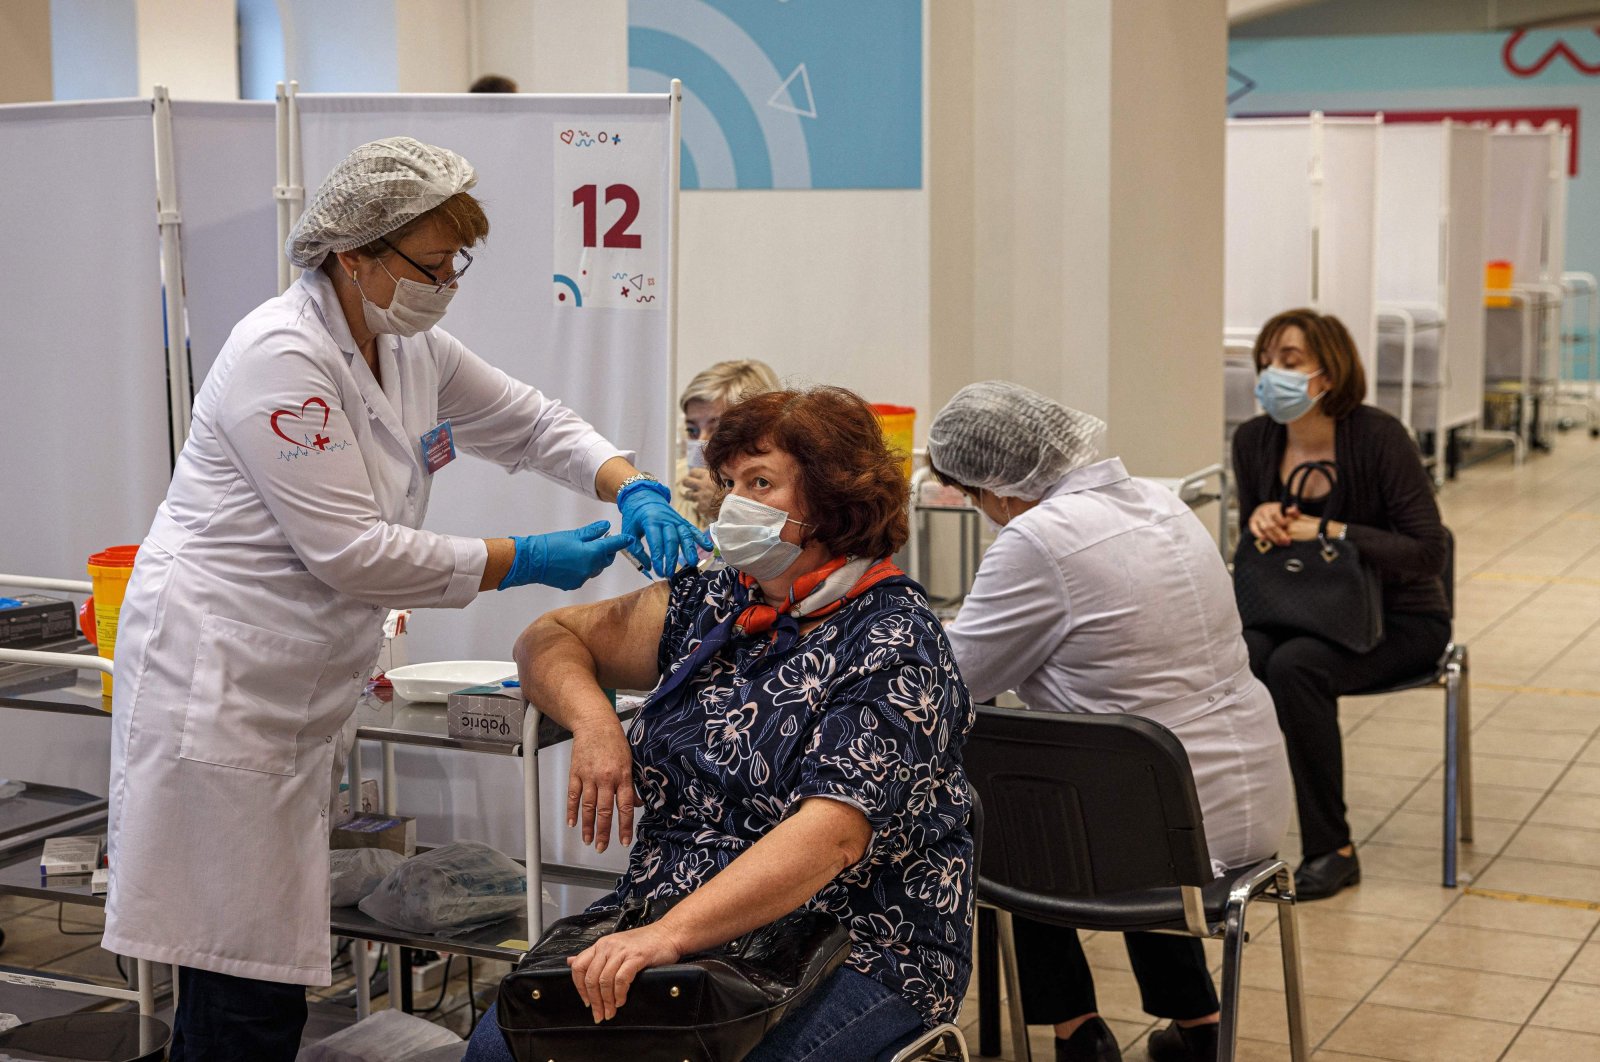 A health care worker administers a dose of Russia's Sputnik V COVID-19 vaccine to a patient at a vaccination center in the GUM State Department store in Moscow, Russia, Oct. 21, 2021. (AFP Photo)